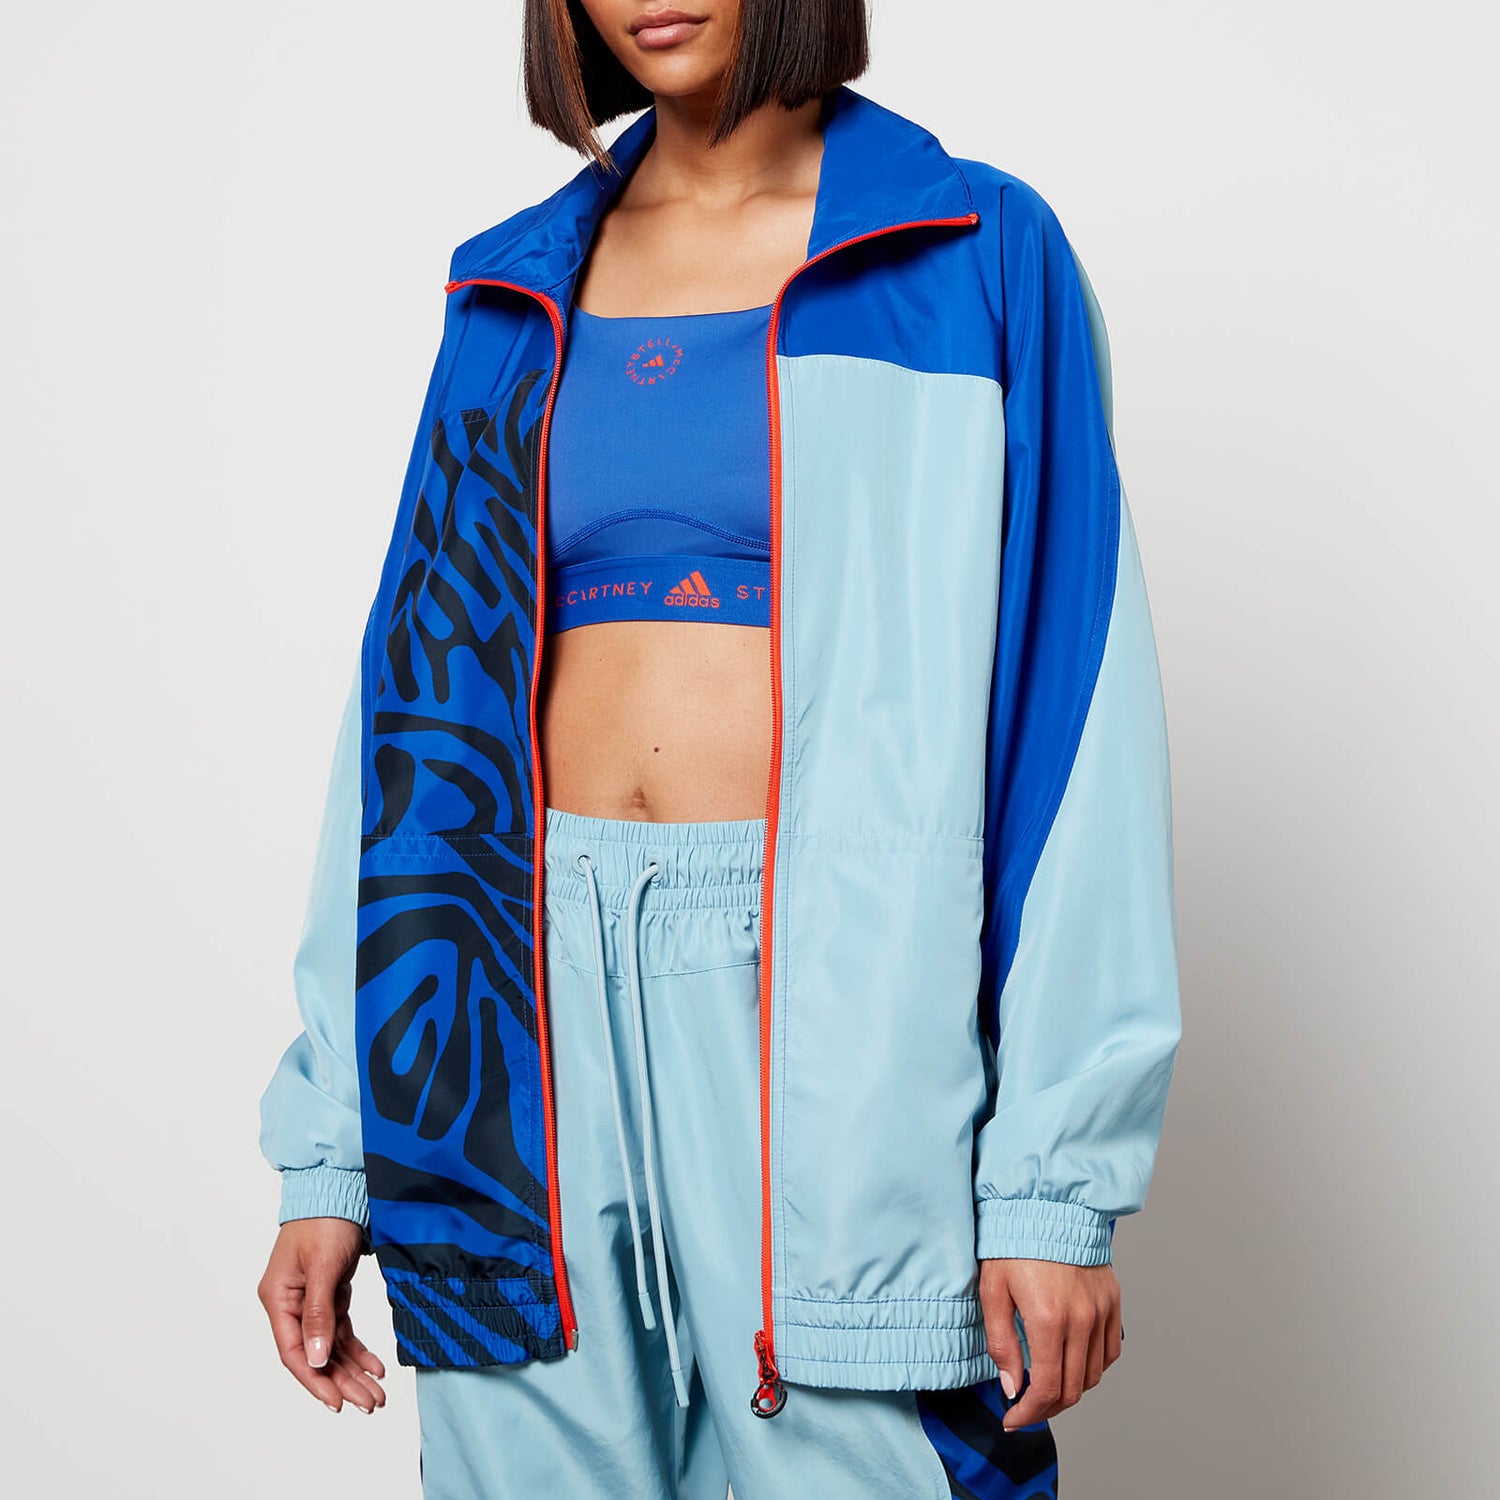 adidas by Stella McCartney Women's Hooded Track Top - Blue - S